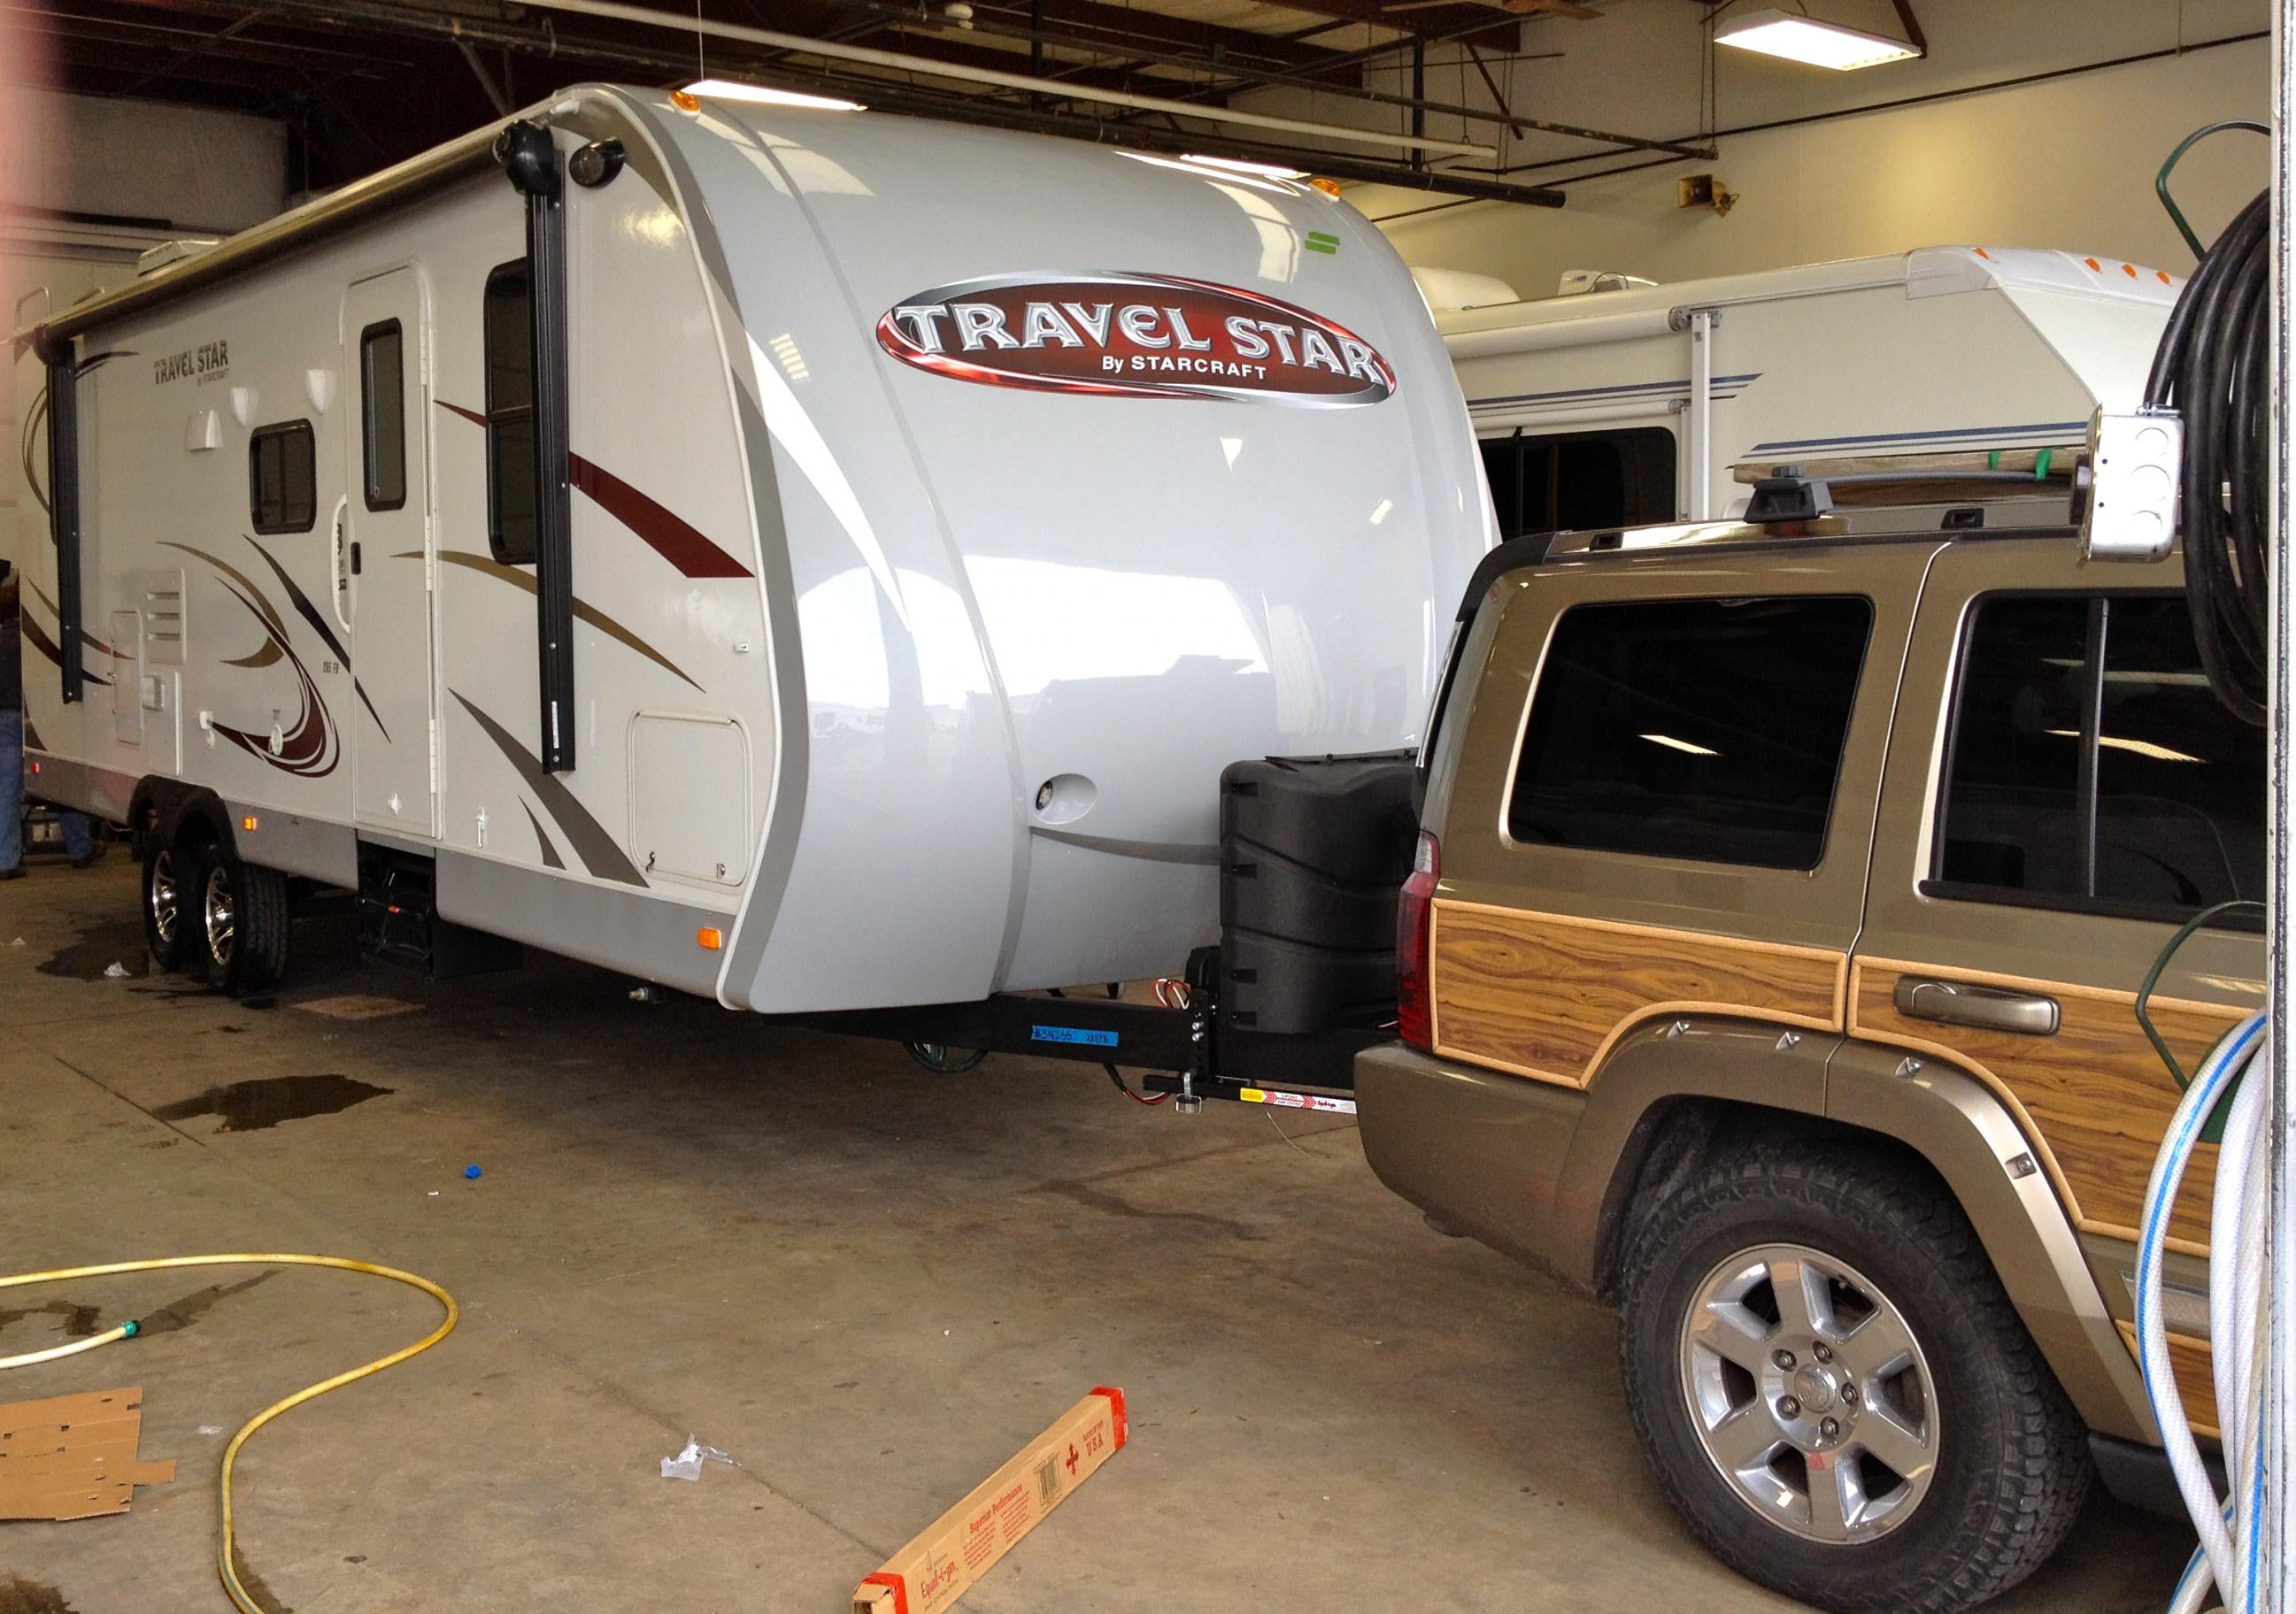 Travel trailer towing. I need some opinions. | Jeep Commander Forum